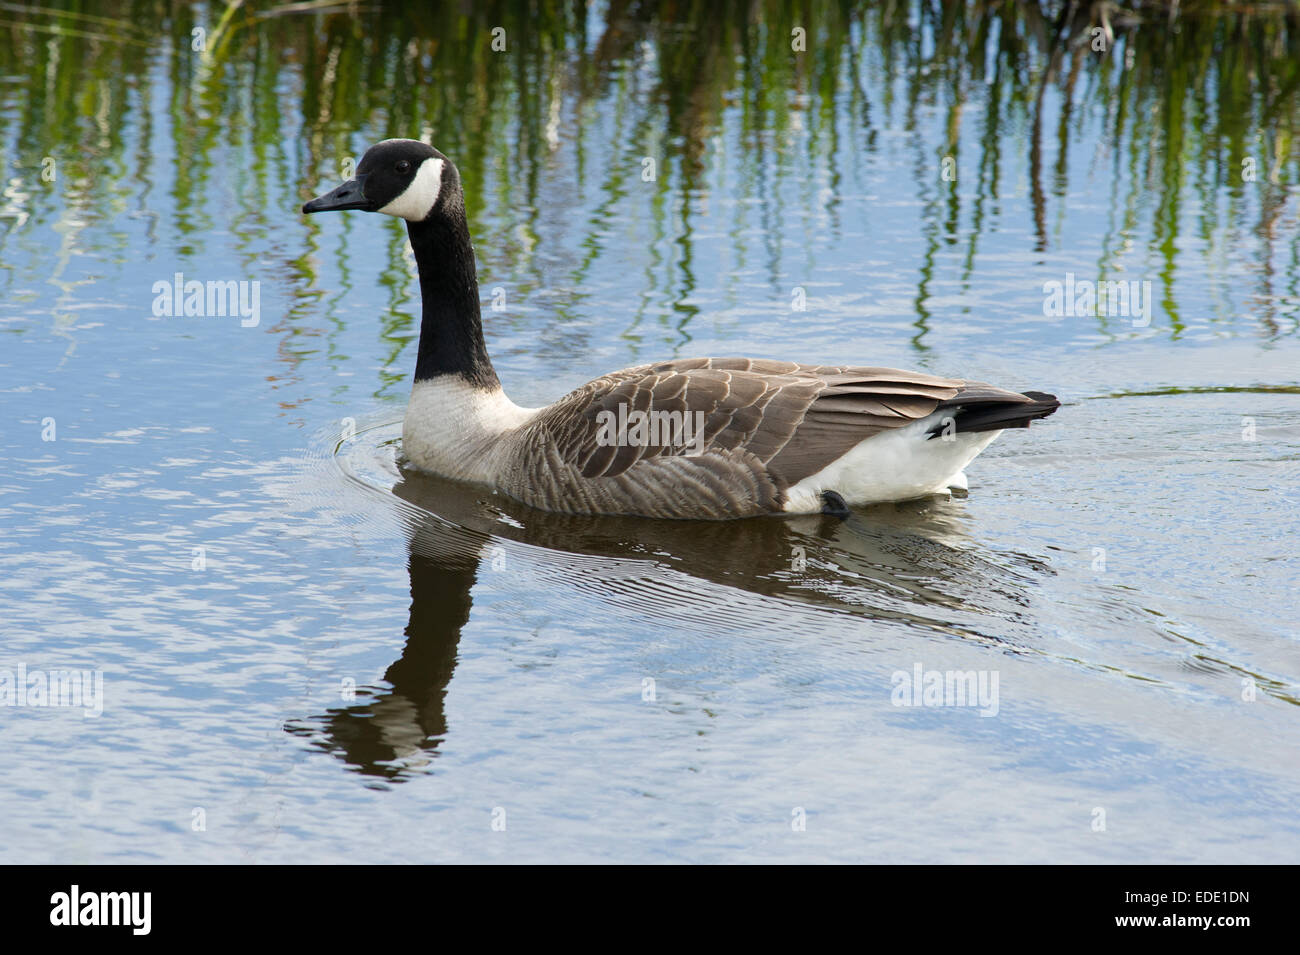 A Canadian Goose (Branta canadensis) swimming in the wetlands of East Yorkshire, England Stock Photo